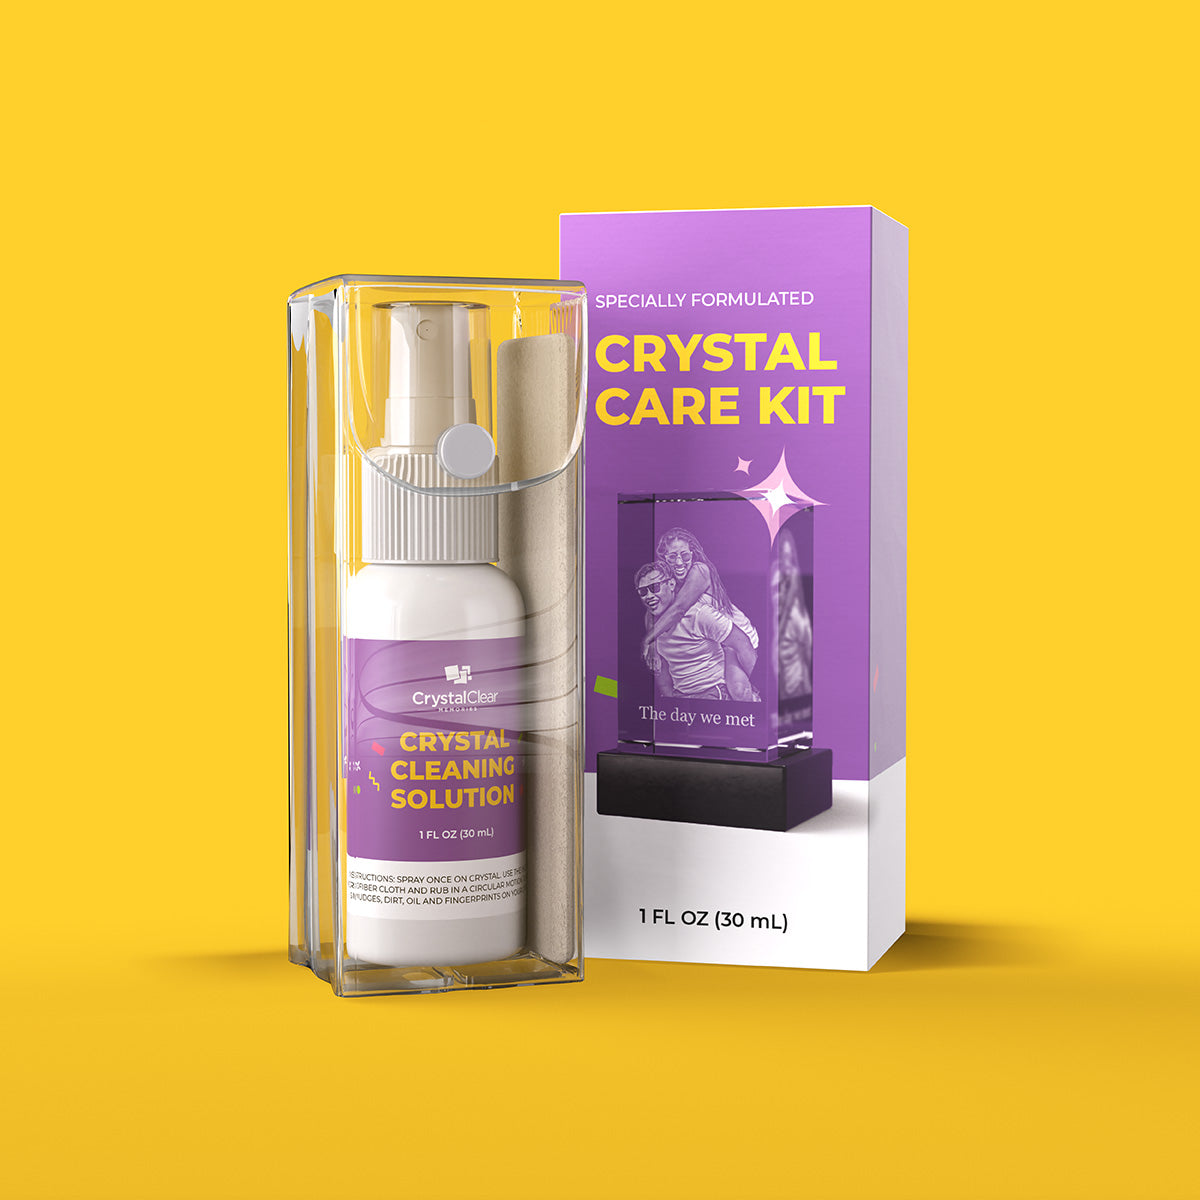 Crystal Care Kit, Specially Formulated